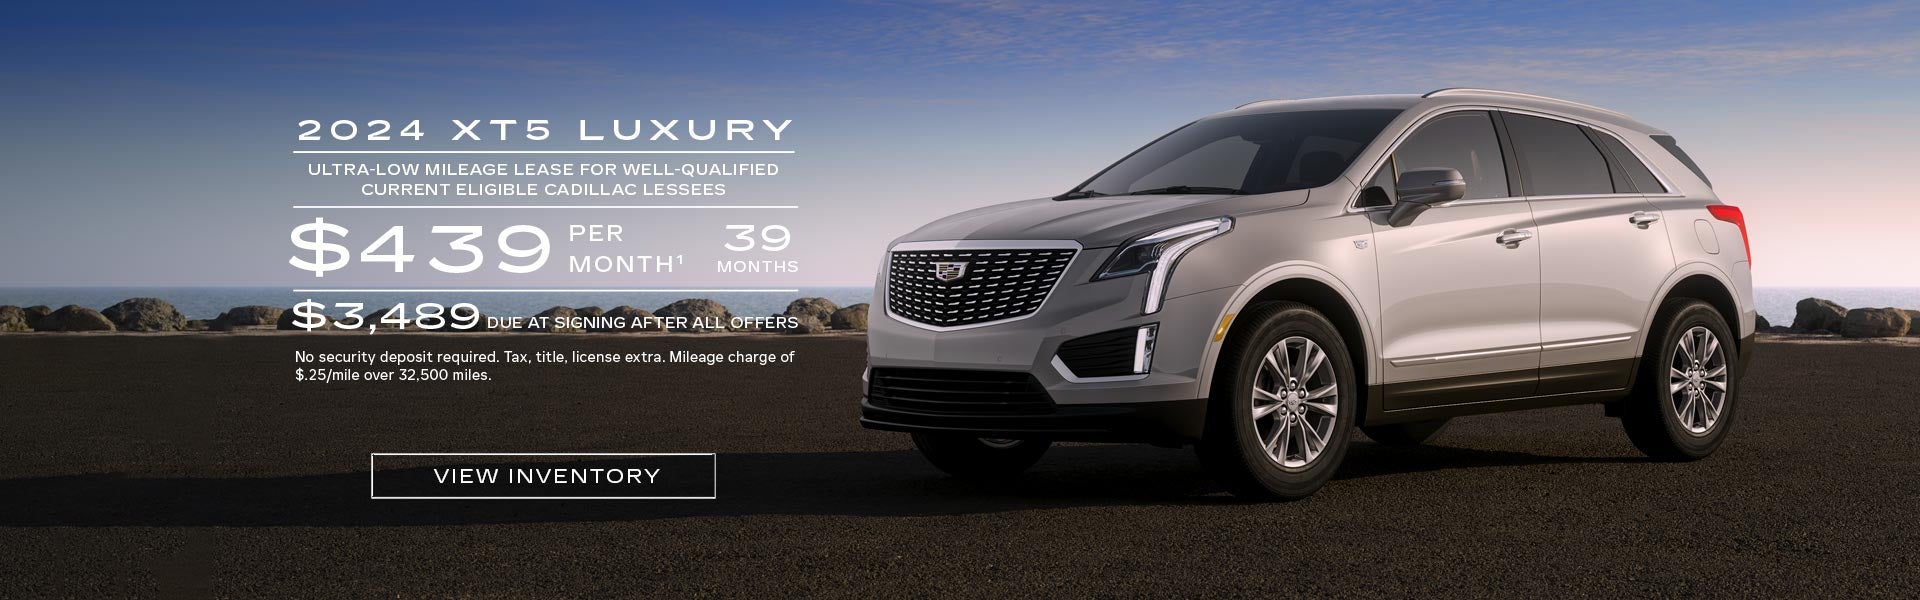 2024 XT5 Luxury. Ultra-low mileage lease for well-qualified current eligible Cadillac lessees. $4...